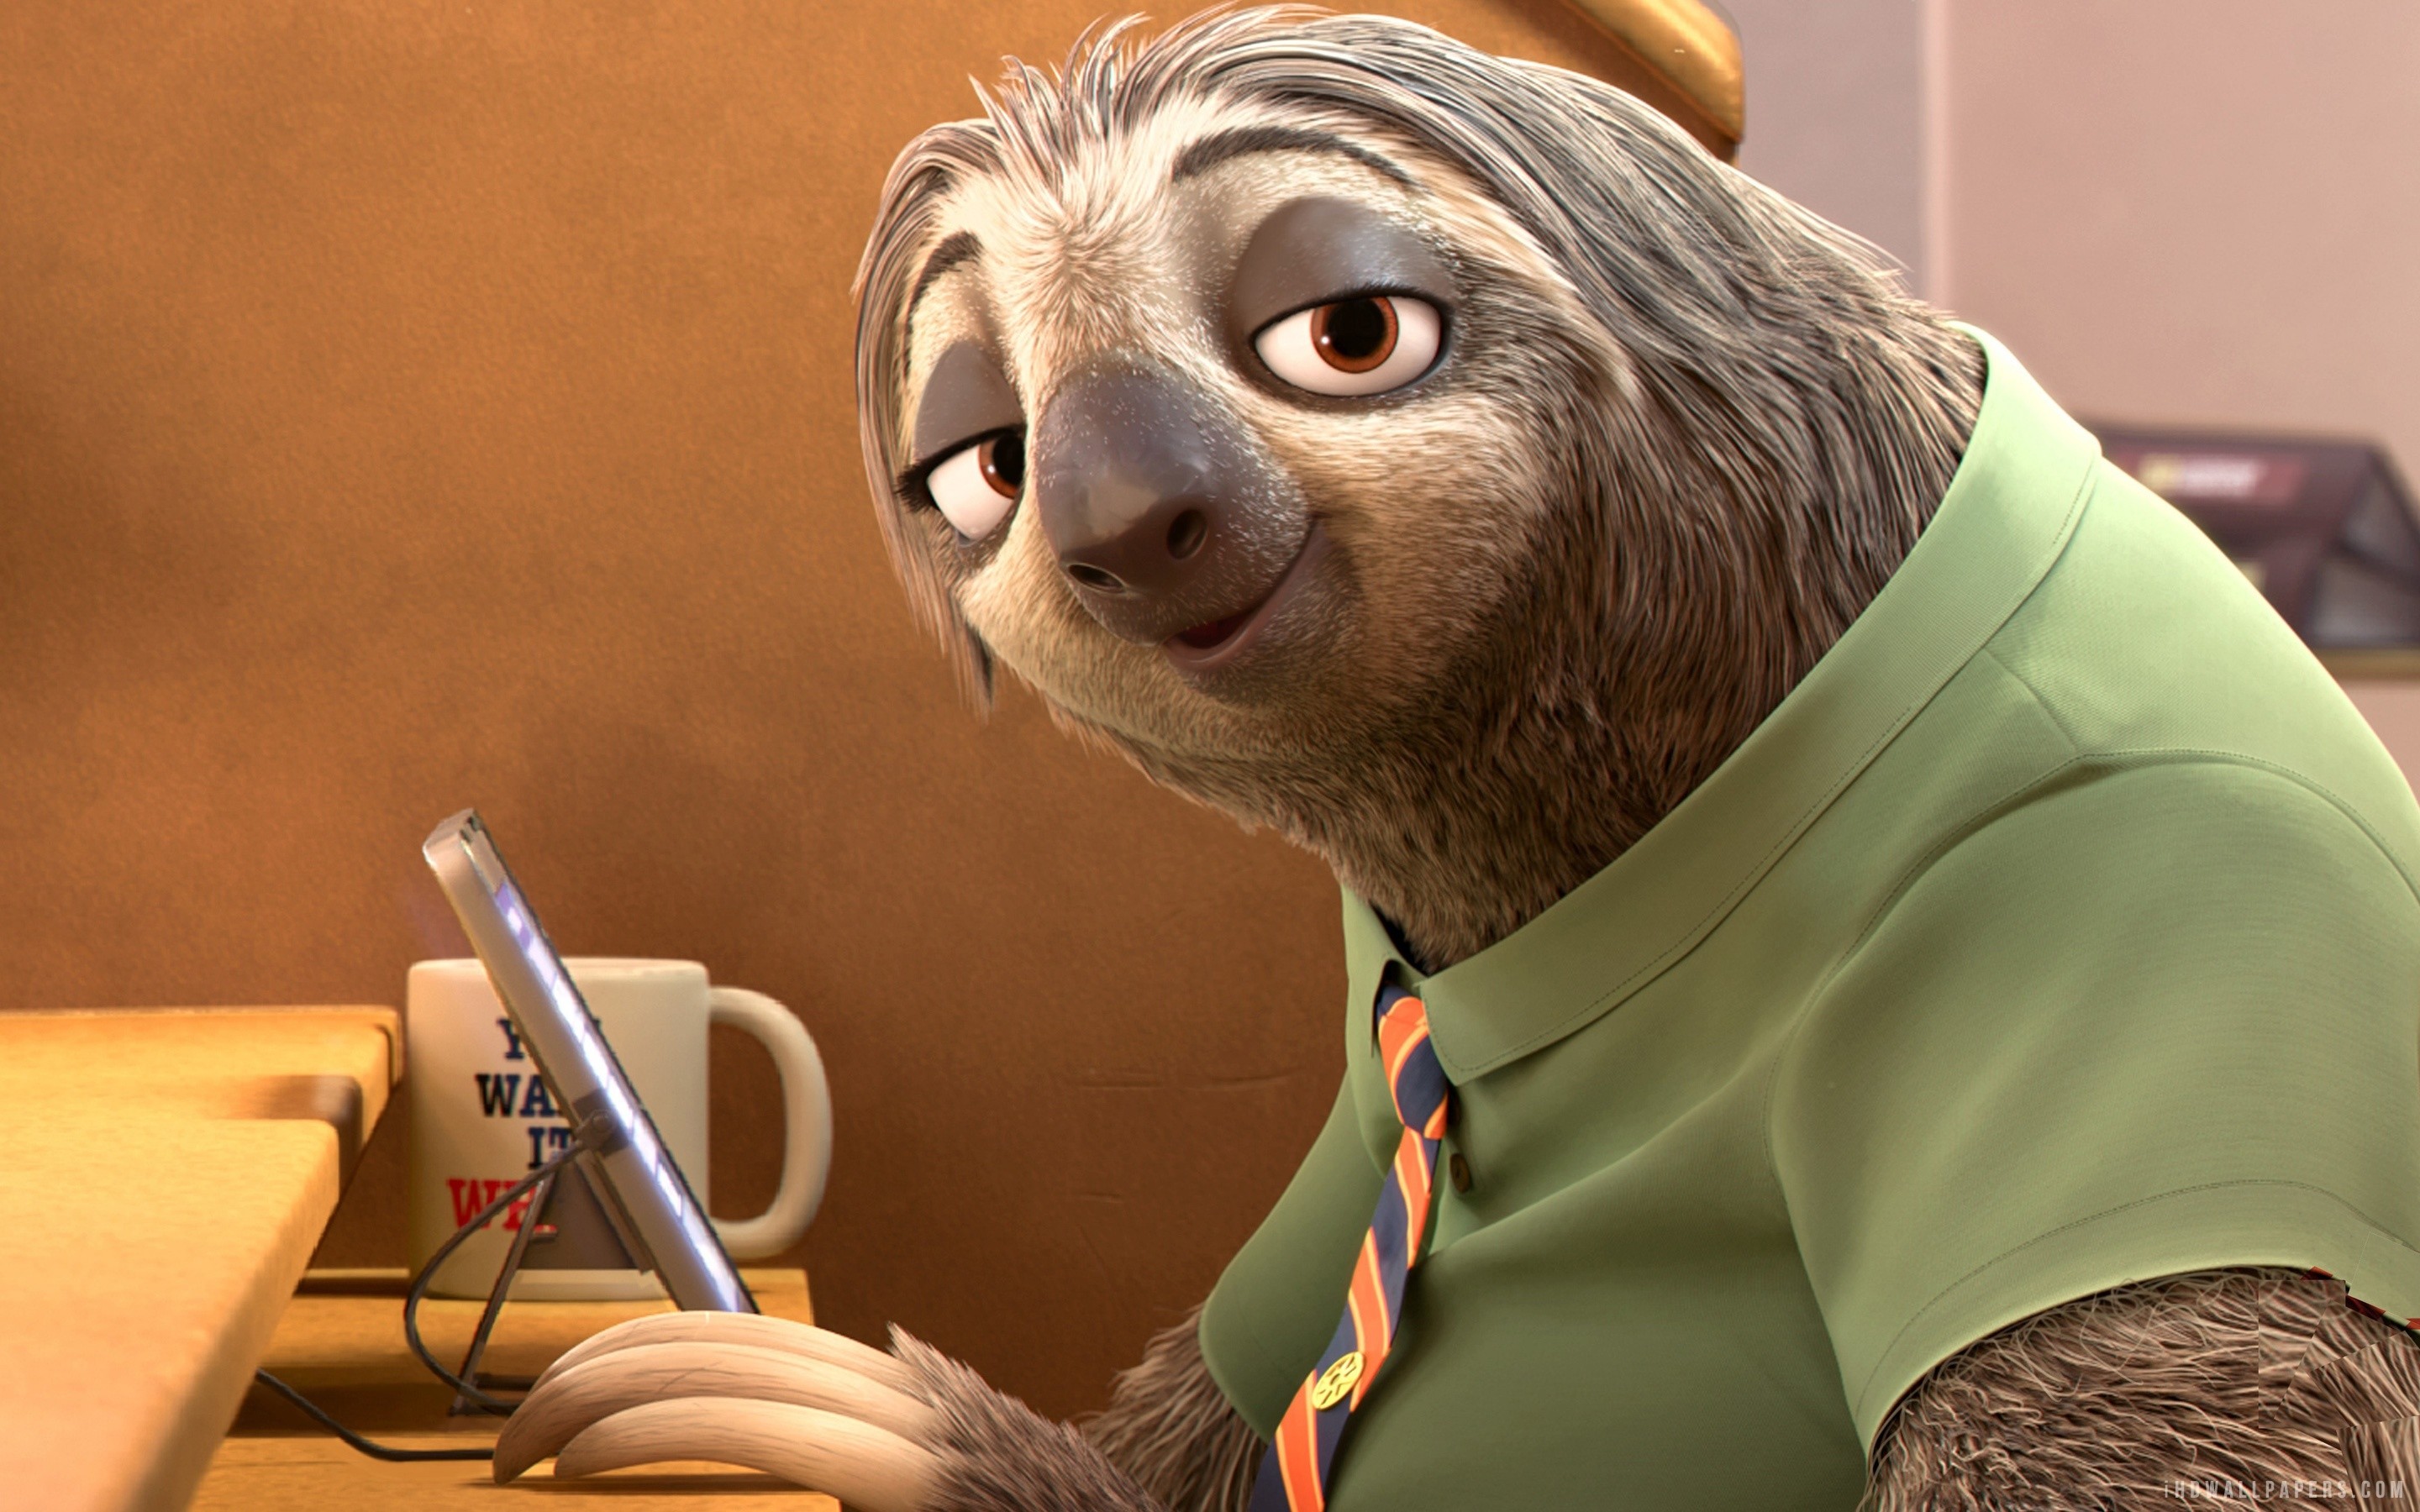 2880x1800 ... Sloth in Zootopia Movie HD Wallpaper | iHD Wallpapers